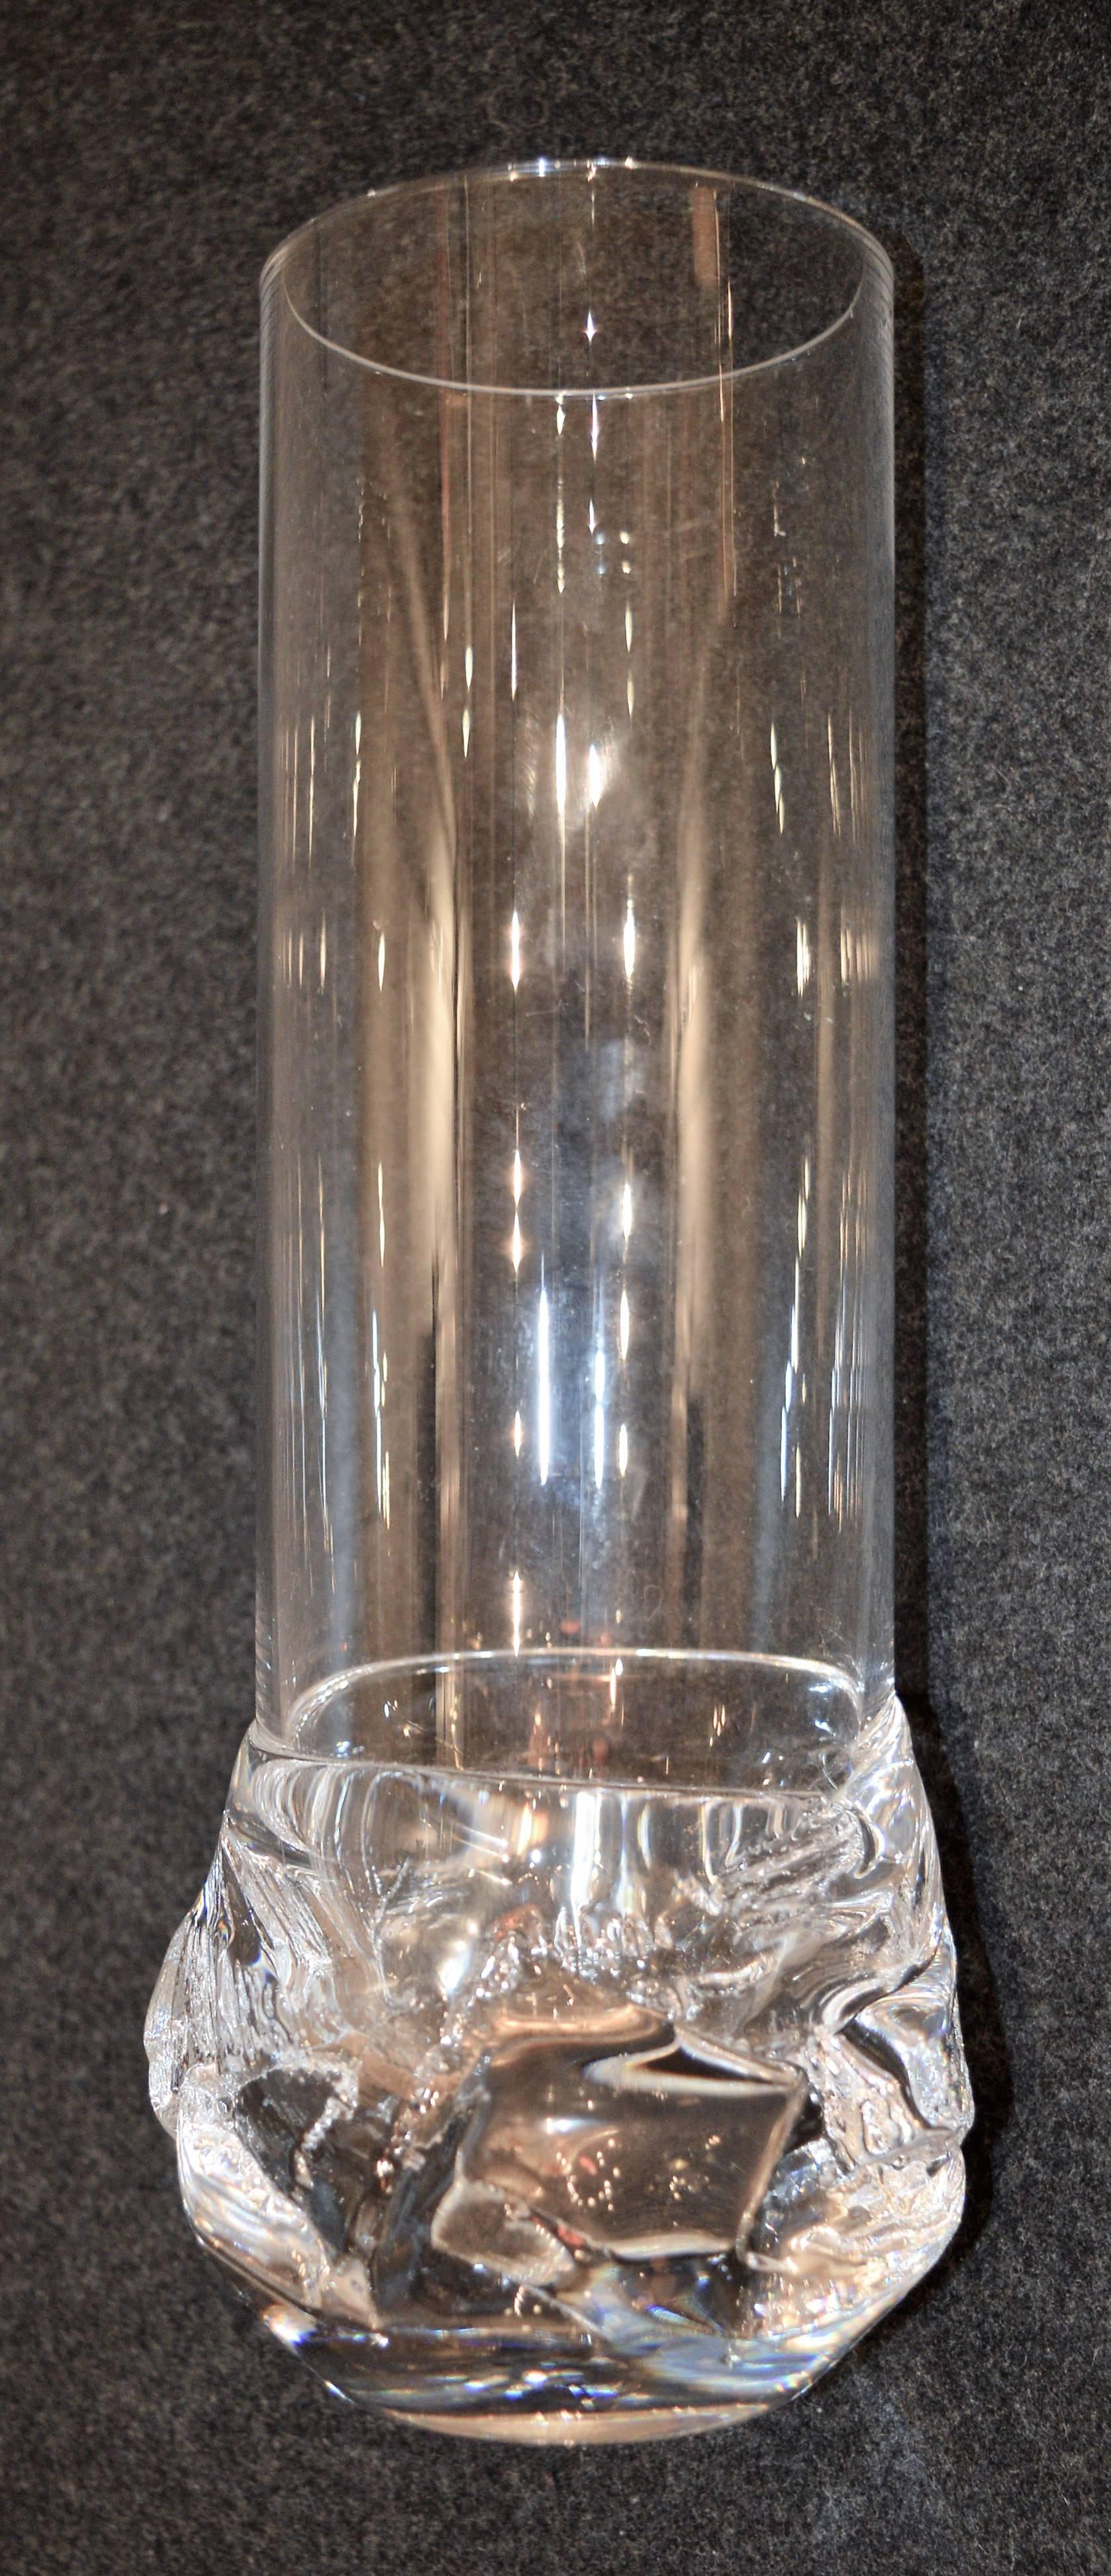 This spectacular Brutalist based cylinder vase was made by Daum in crystal and is signed. The contrast between the textured and sculptural base, with the clean upper cylinder, is extremely effective. In fabulous condition with no chips, cracks or